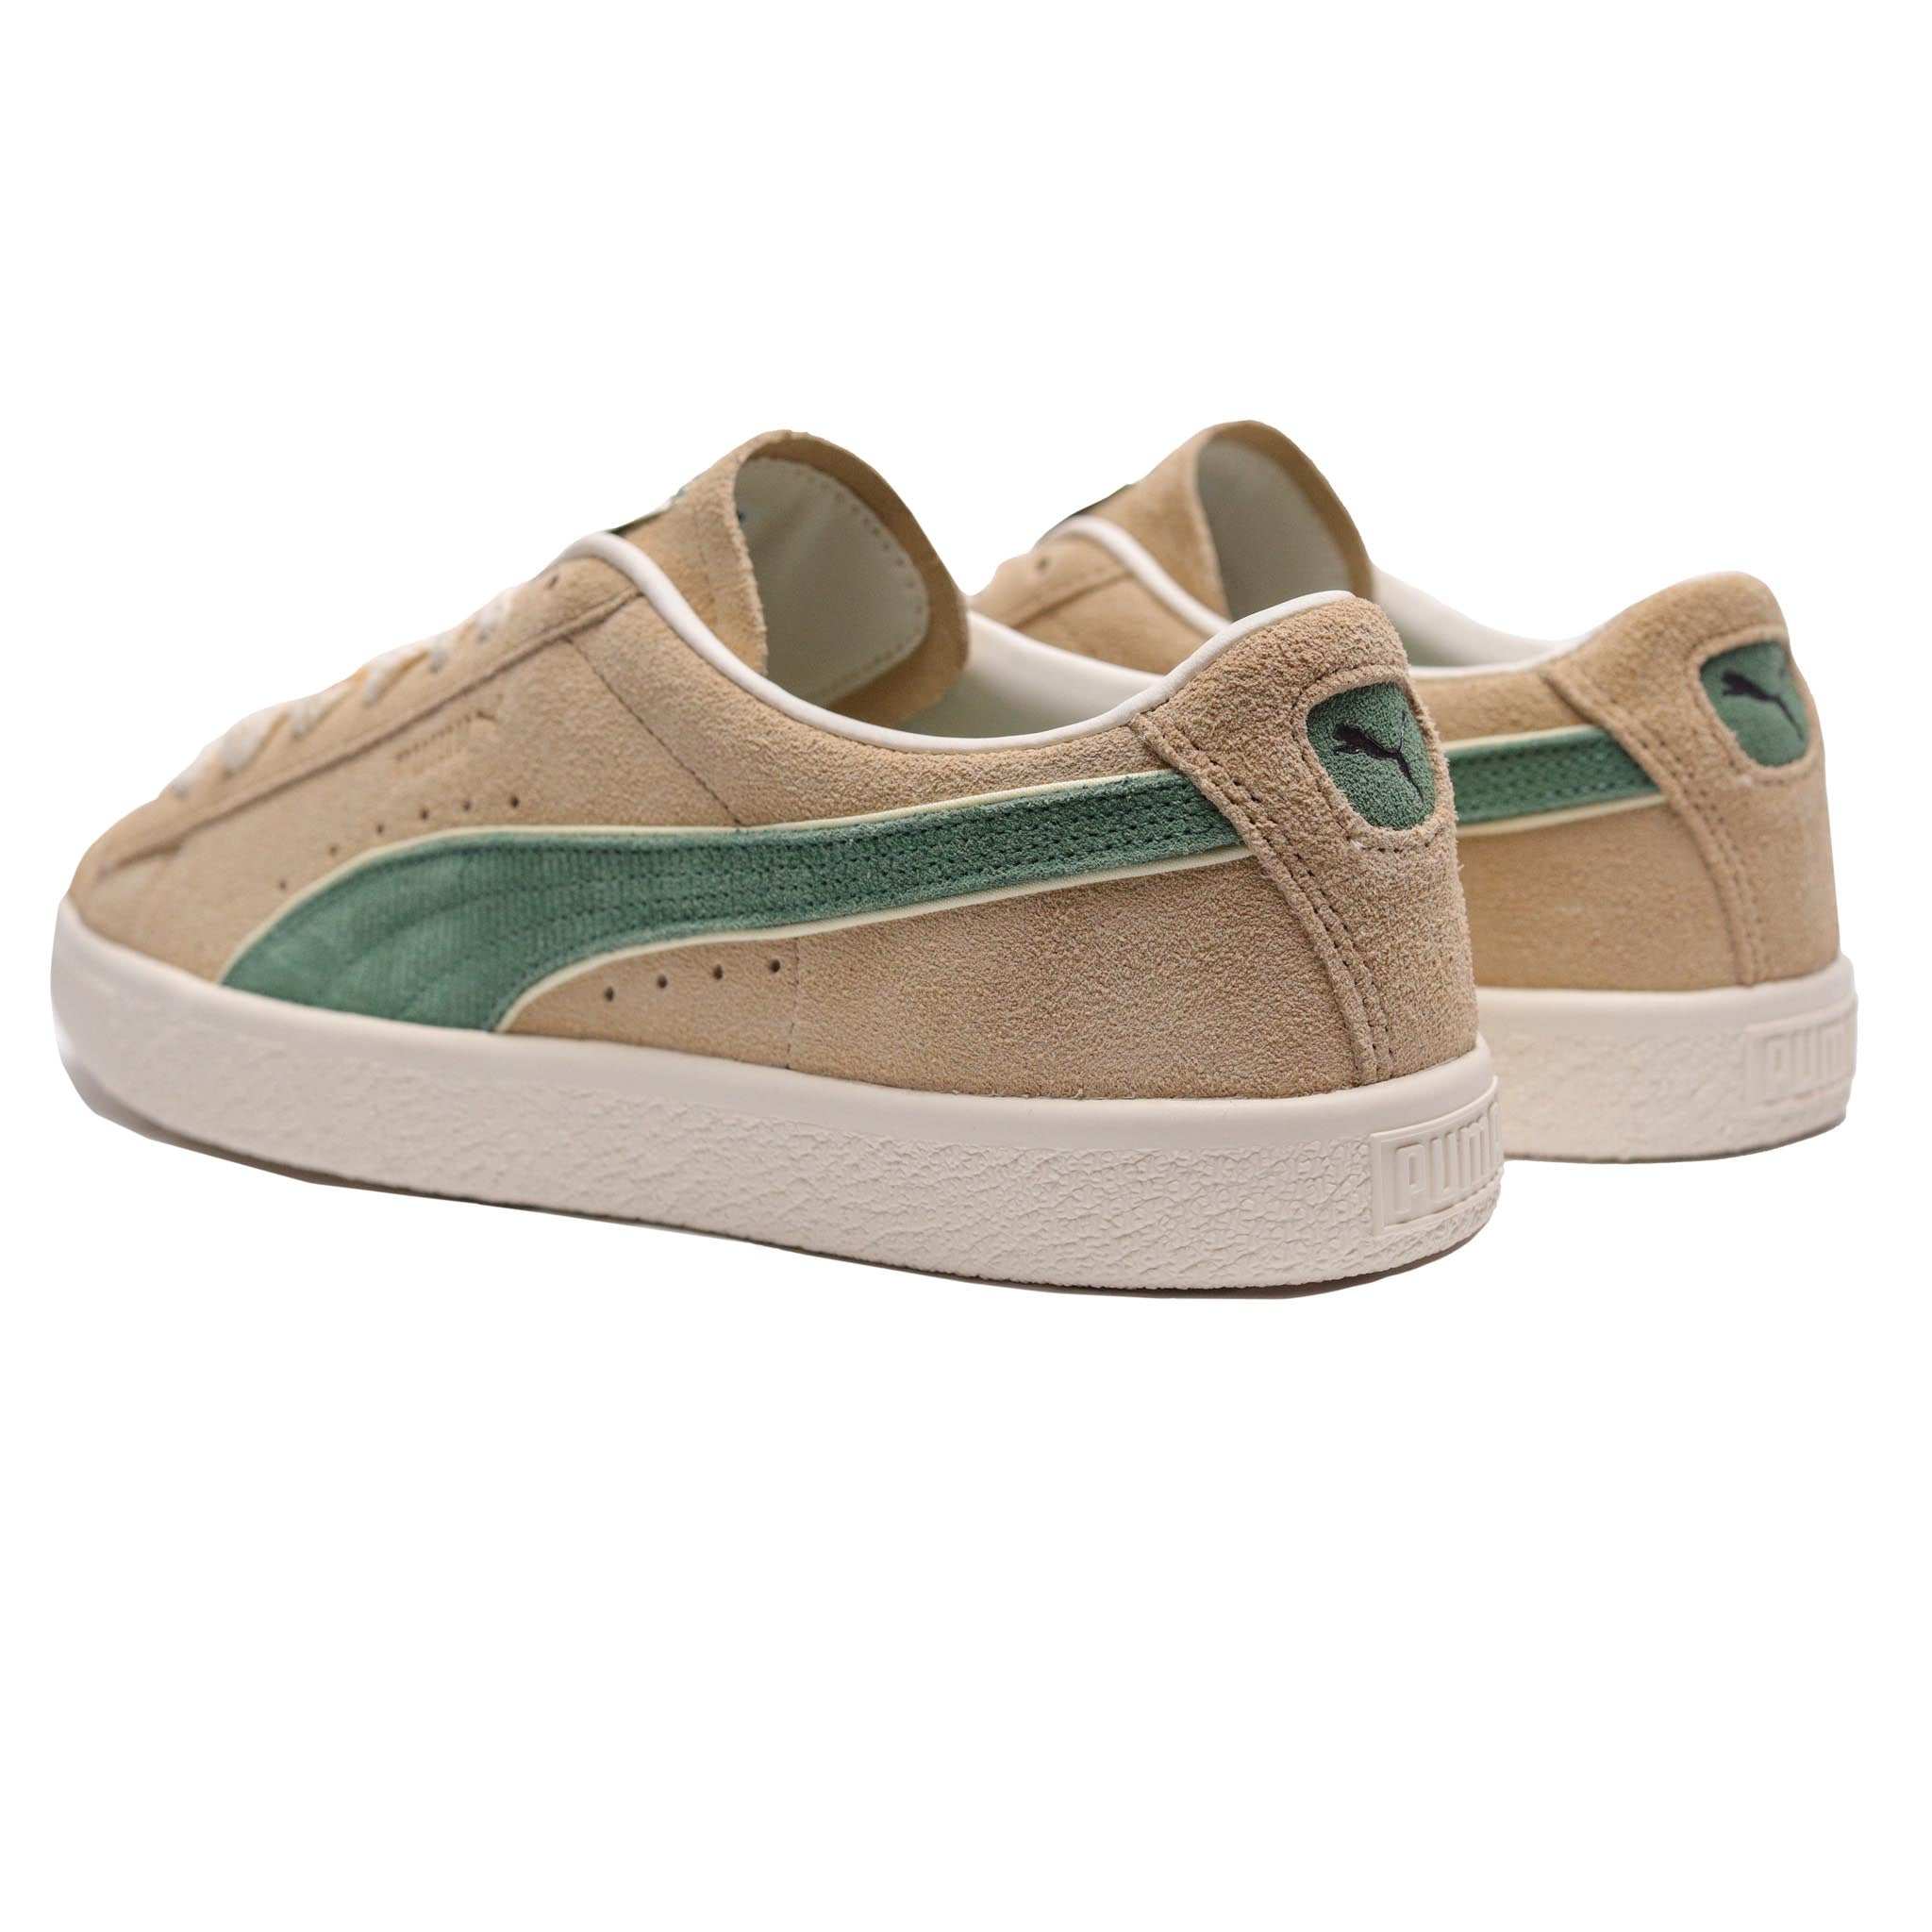 Puma Suede VTG Players Lounge Light Sand/Forest